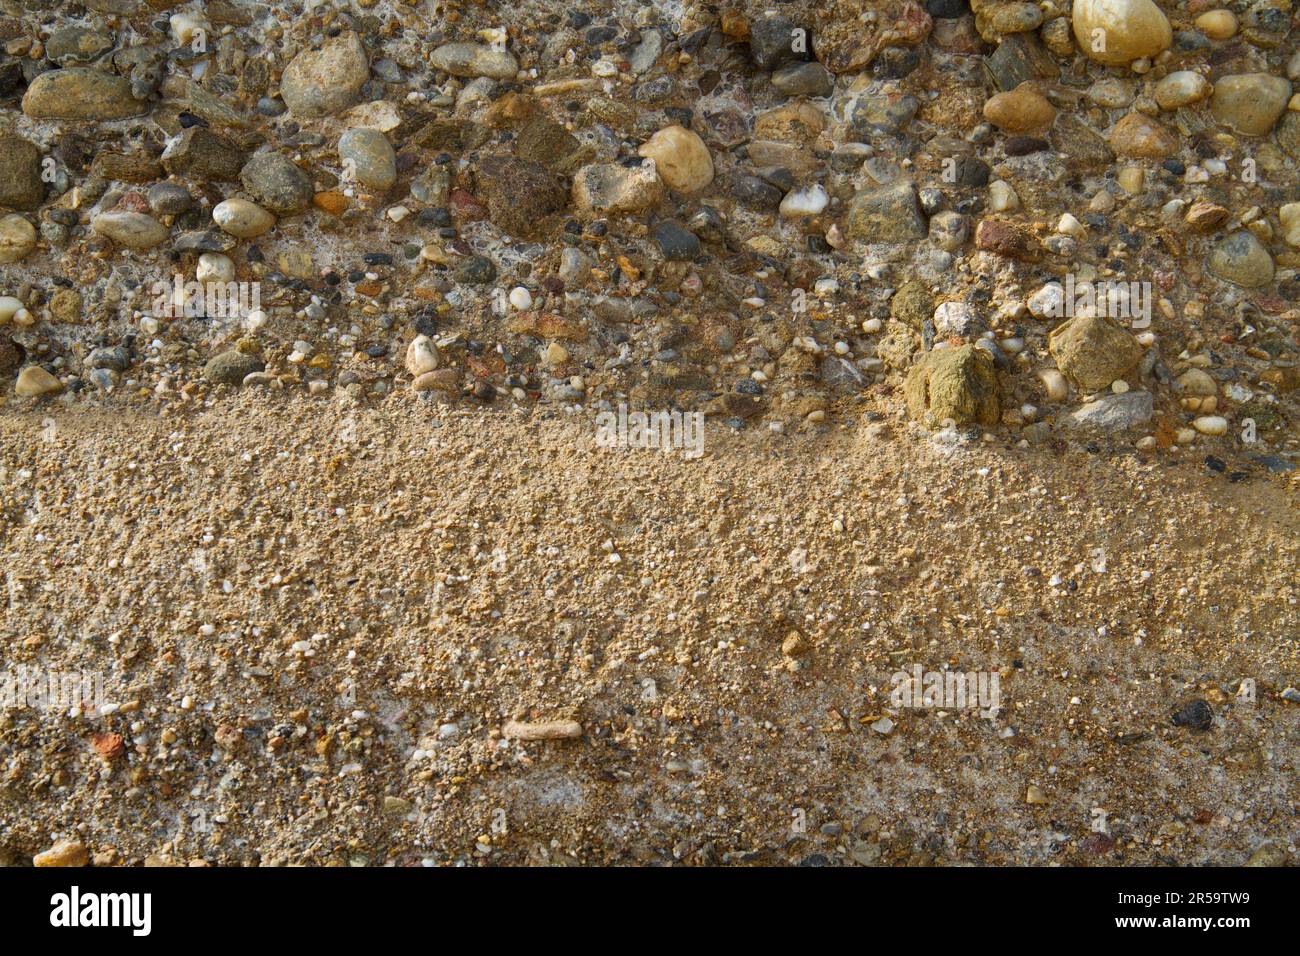 Layered sediment, consisting of a layer of rounded gravel and below that a layer of coarse sand Stock Photo